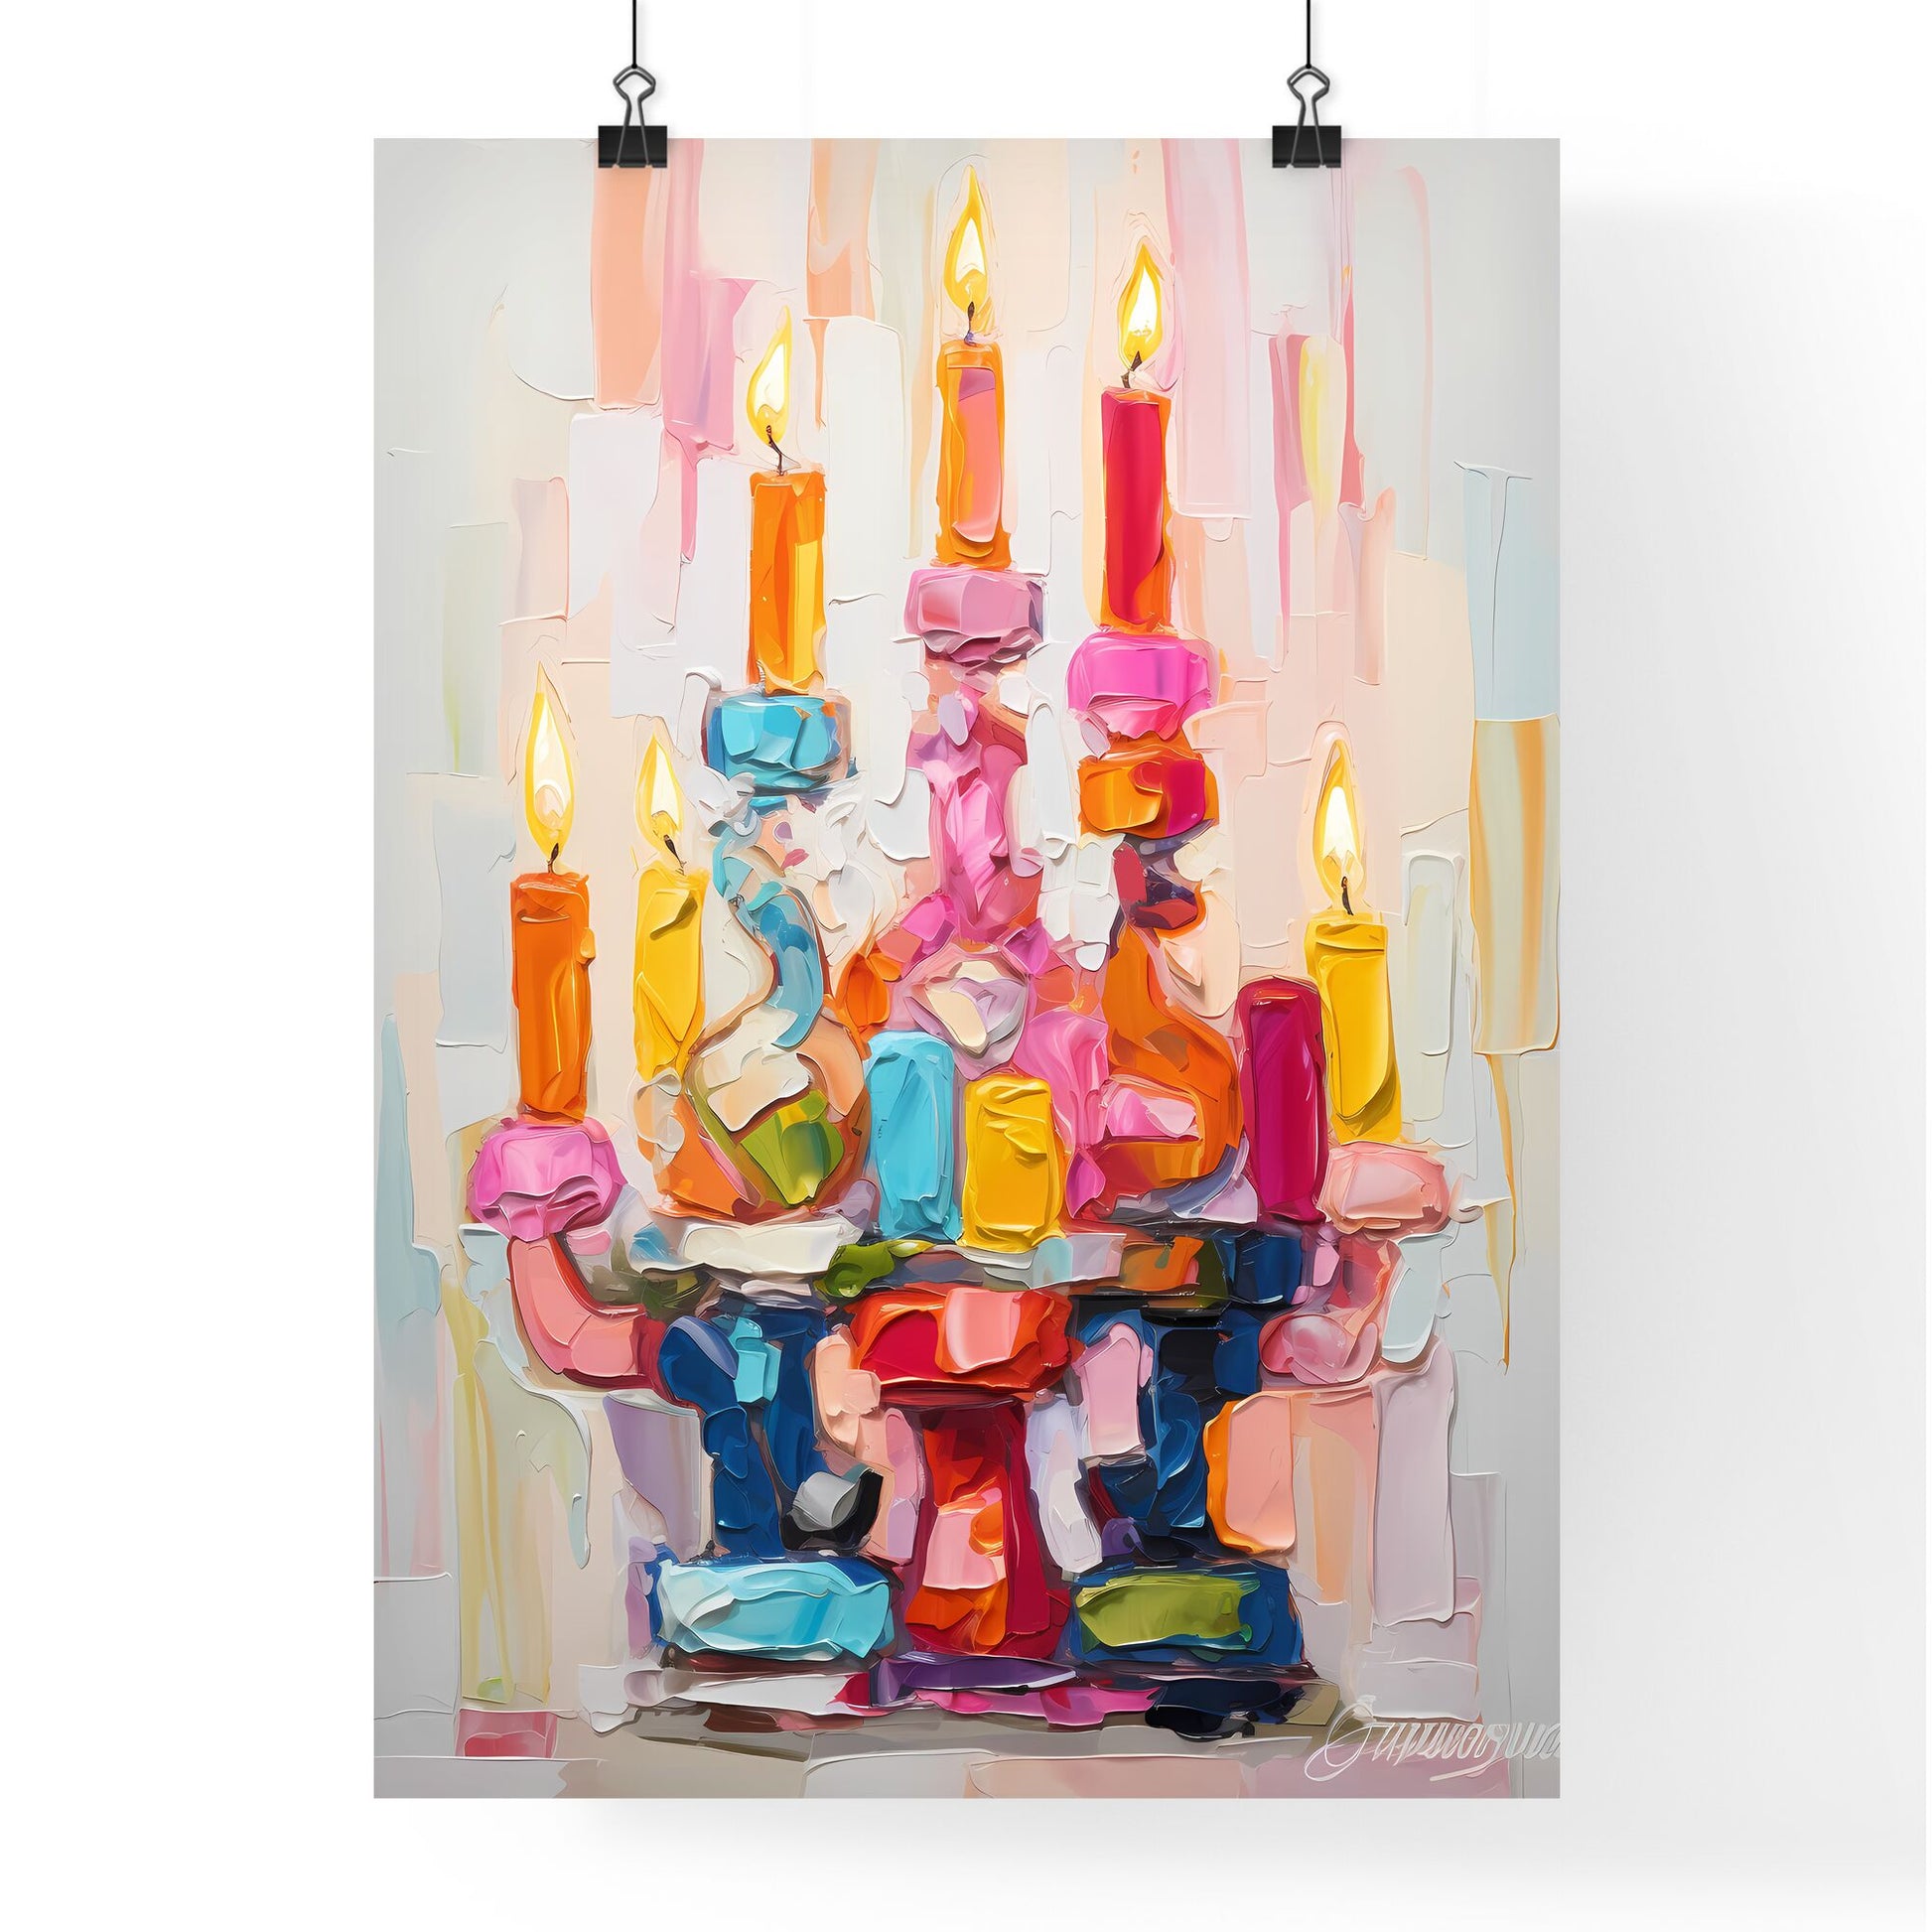 A Poster of a colorful menorah painted on white - A Painting Of A Colorful Candle Holder With Candles Default Title